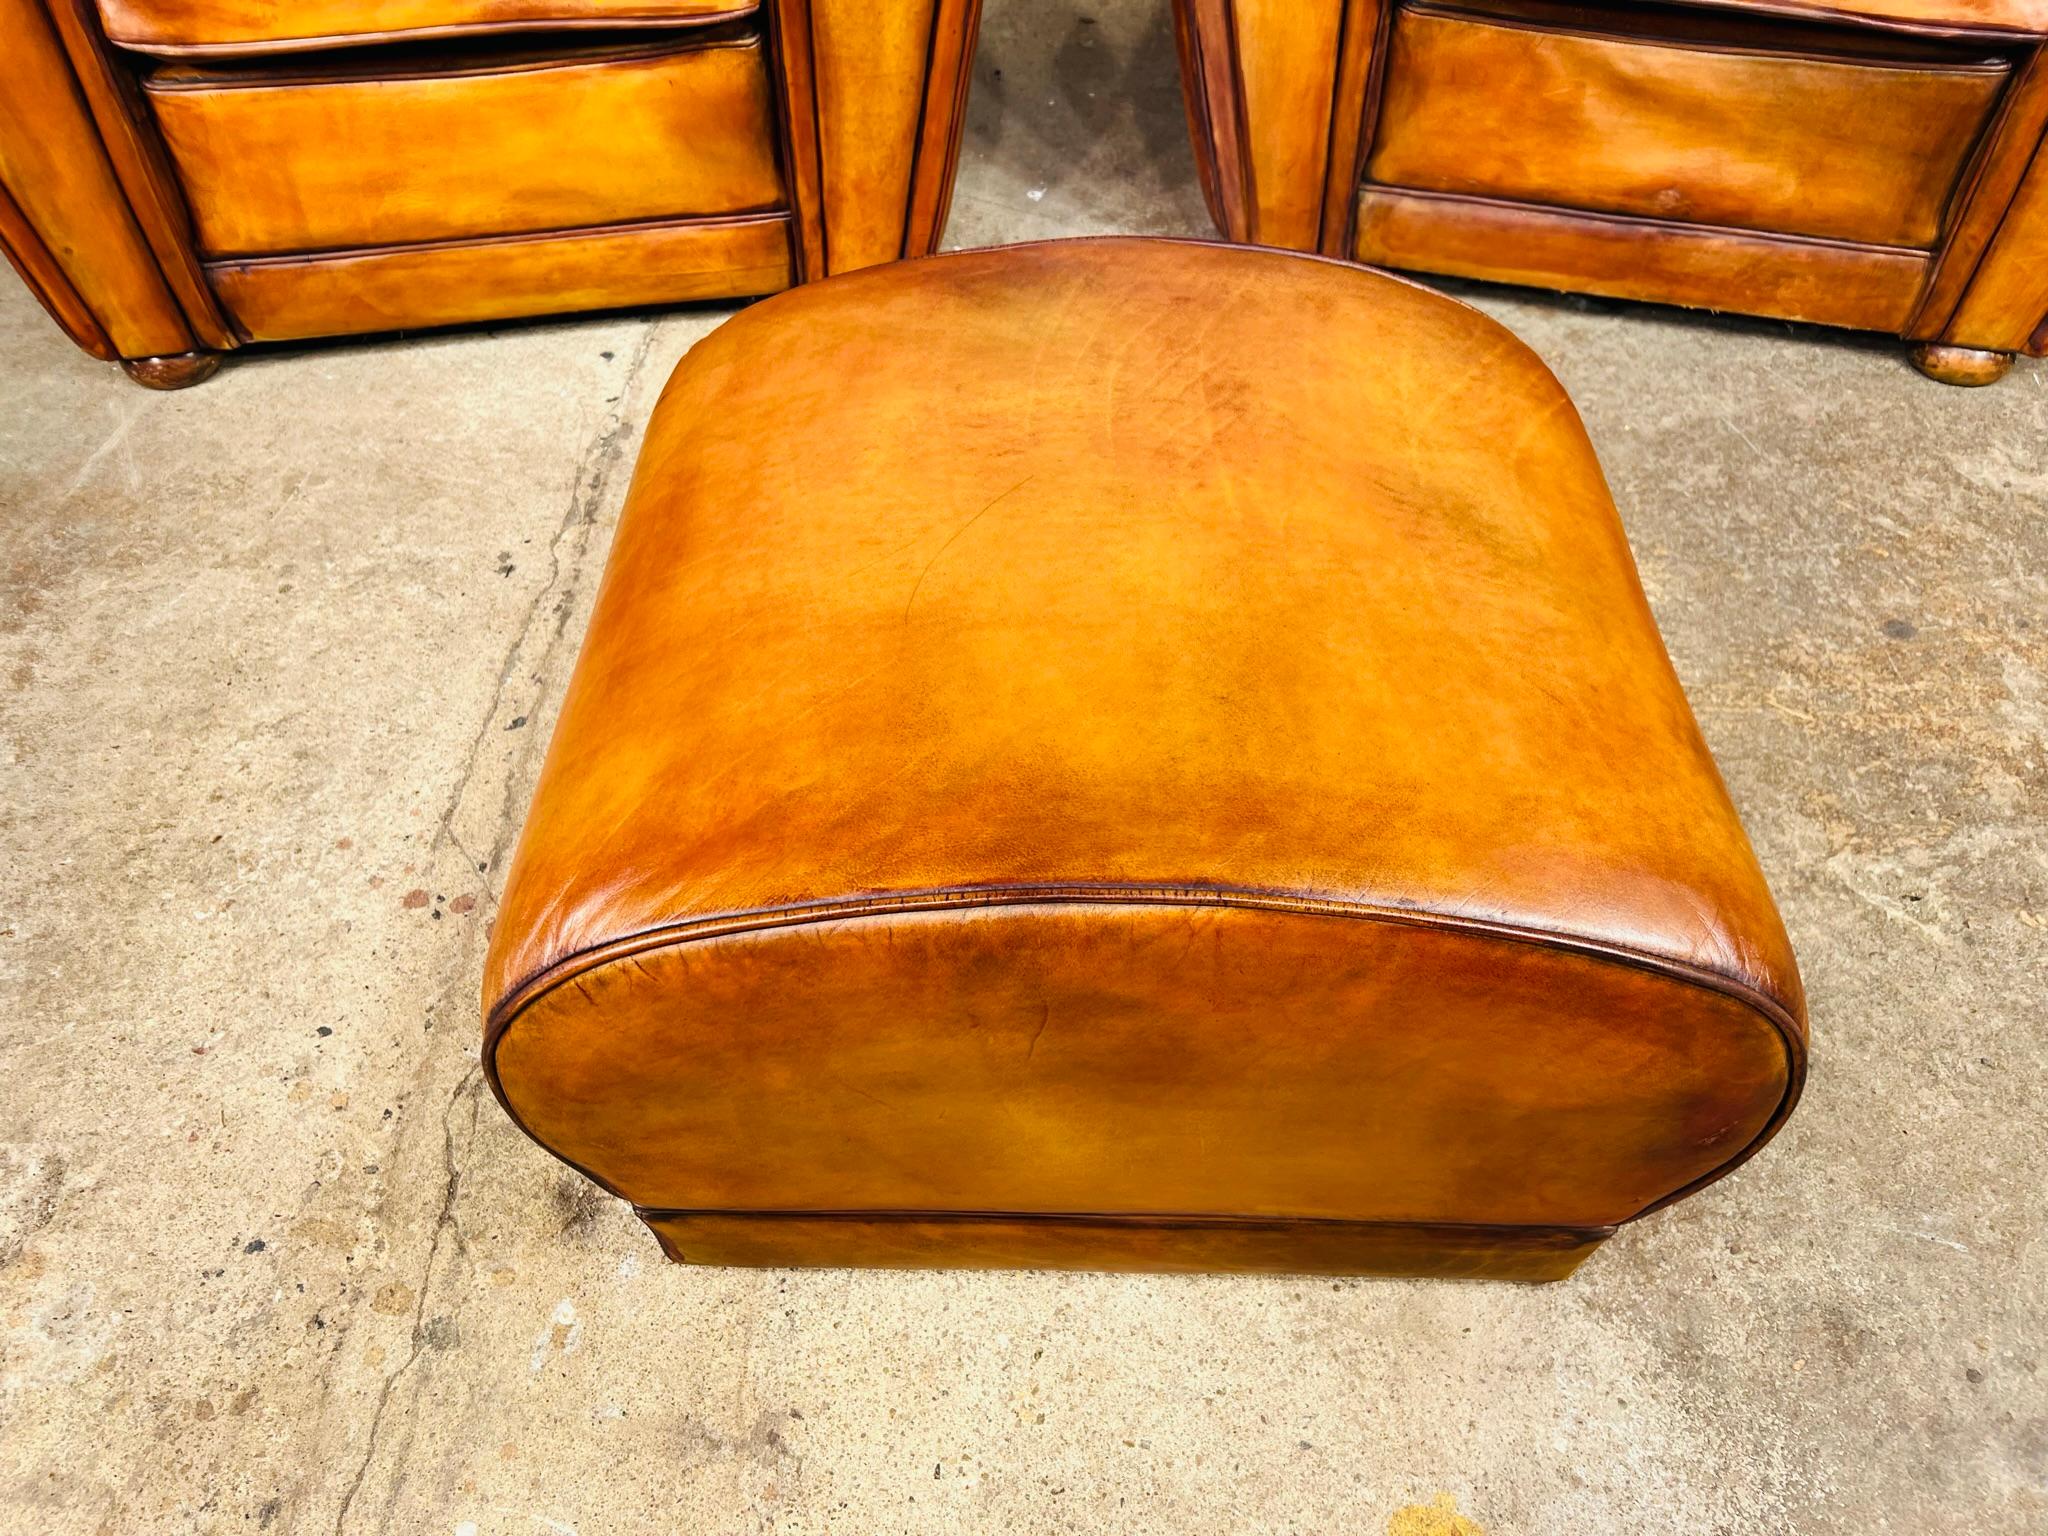 20th Century Huge Pair of Art Deco Leather Club Chairs Armchairs and Foot Stool 1940s #668